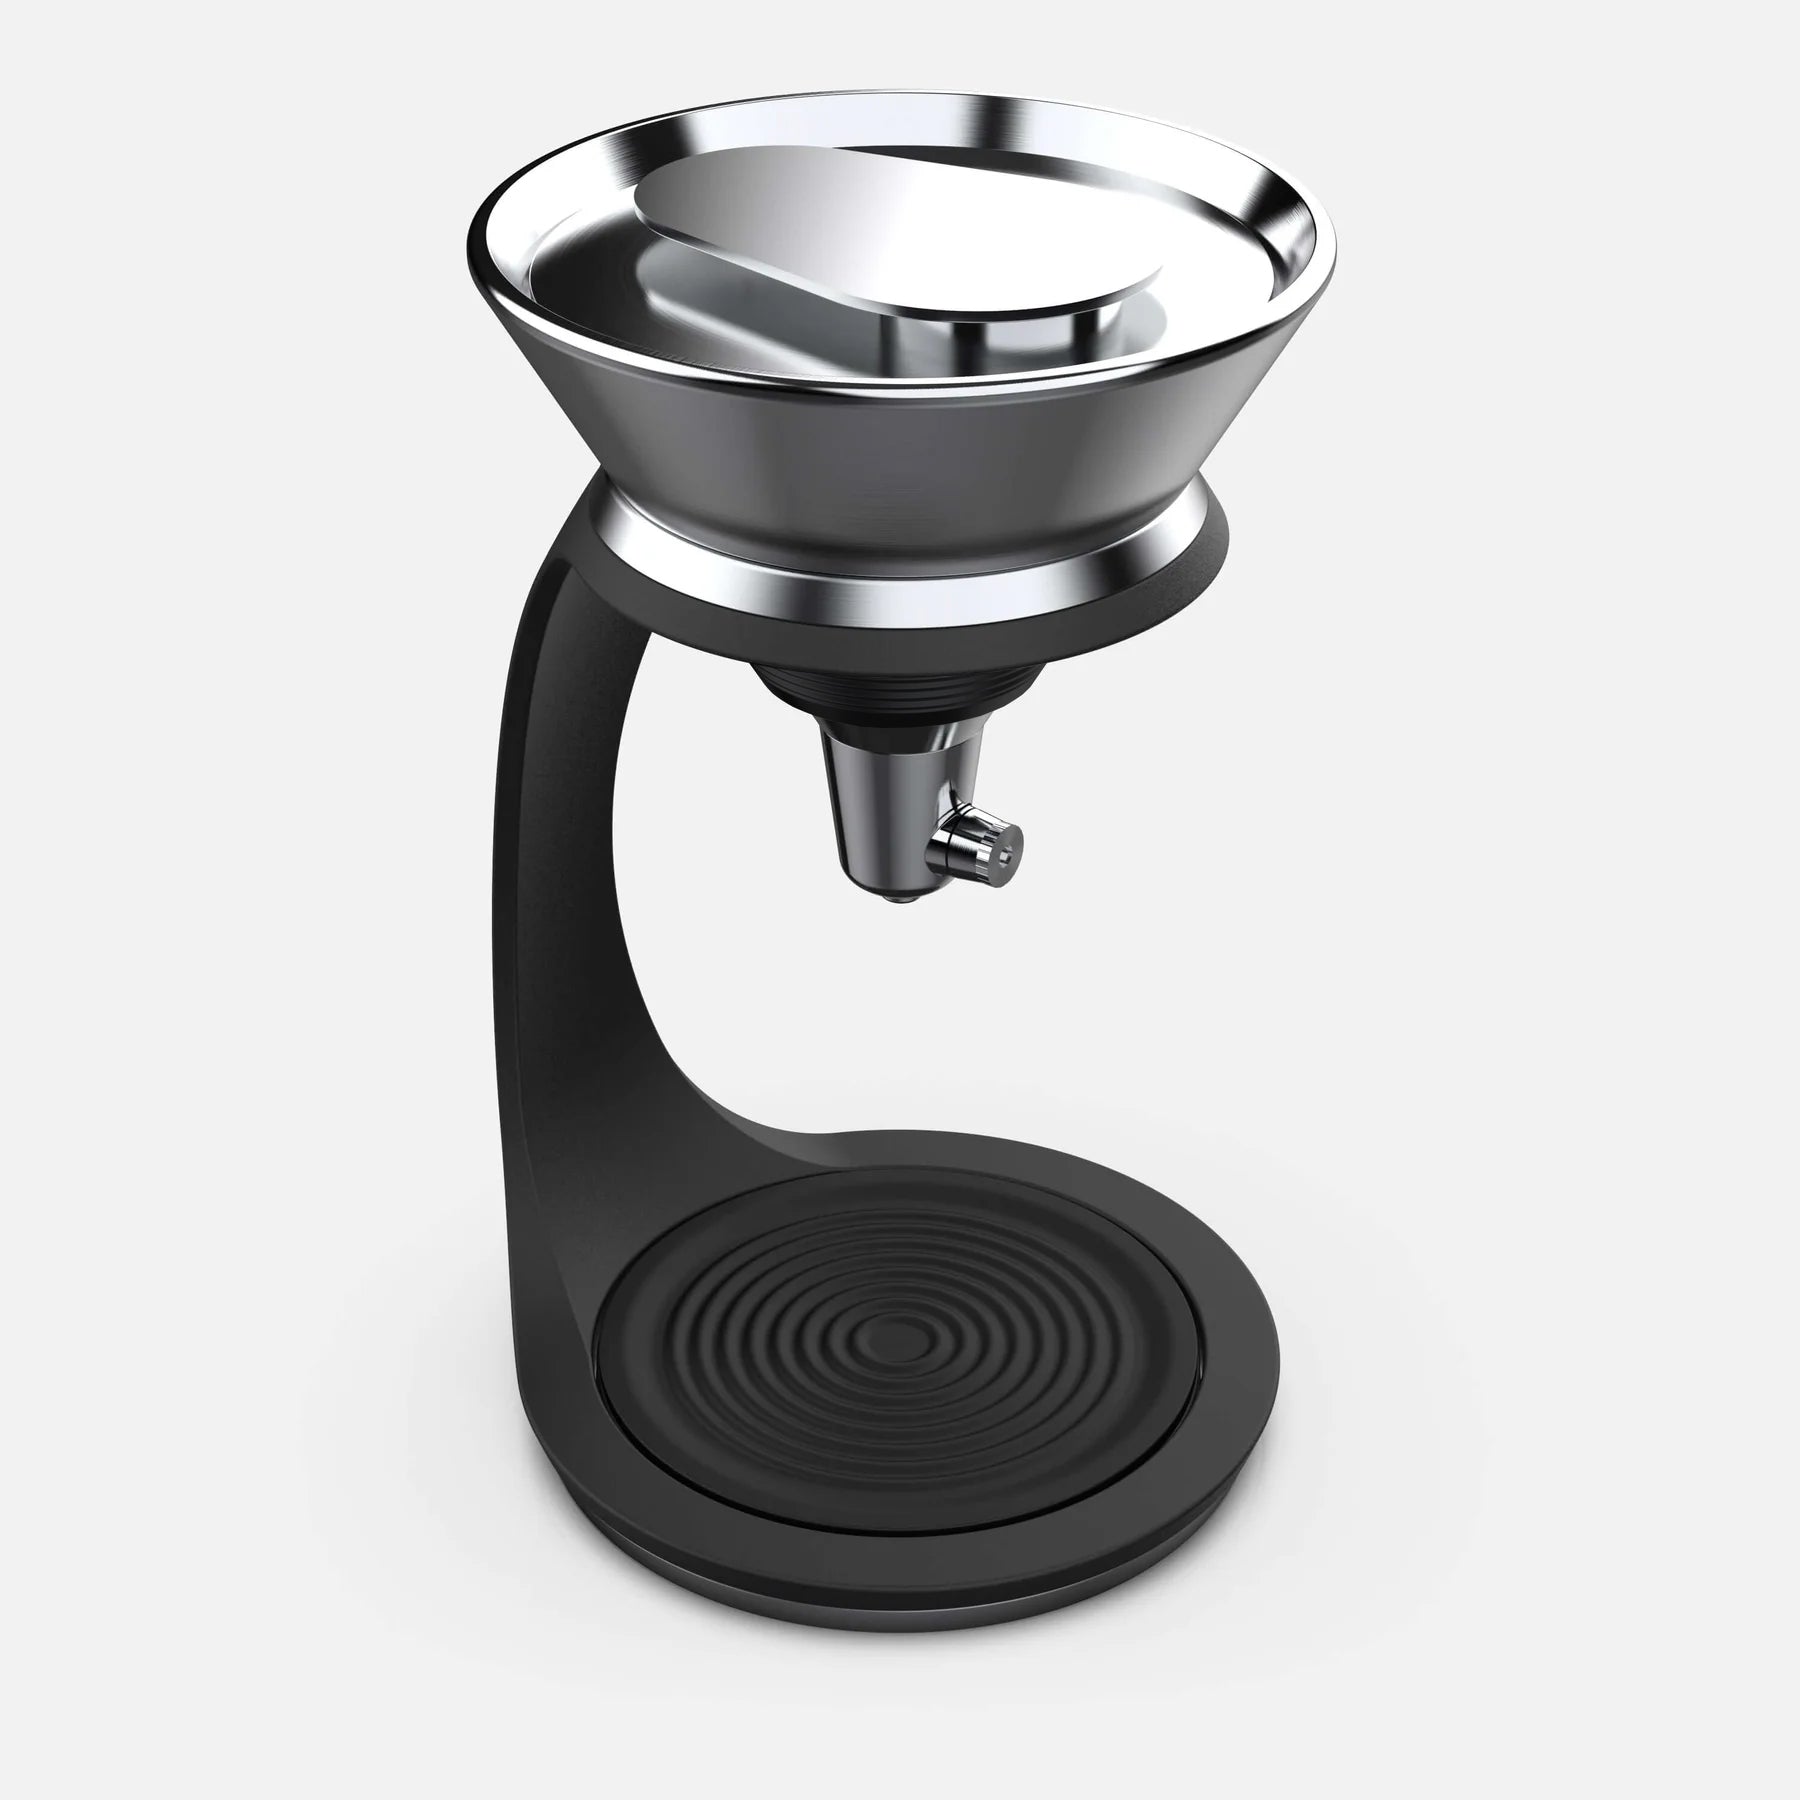 O-LYFE - Drip - Pour Over / Slow / Dripping Coffee Stand Black